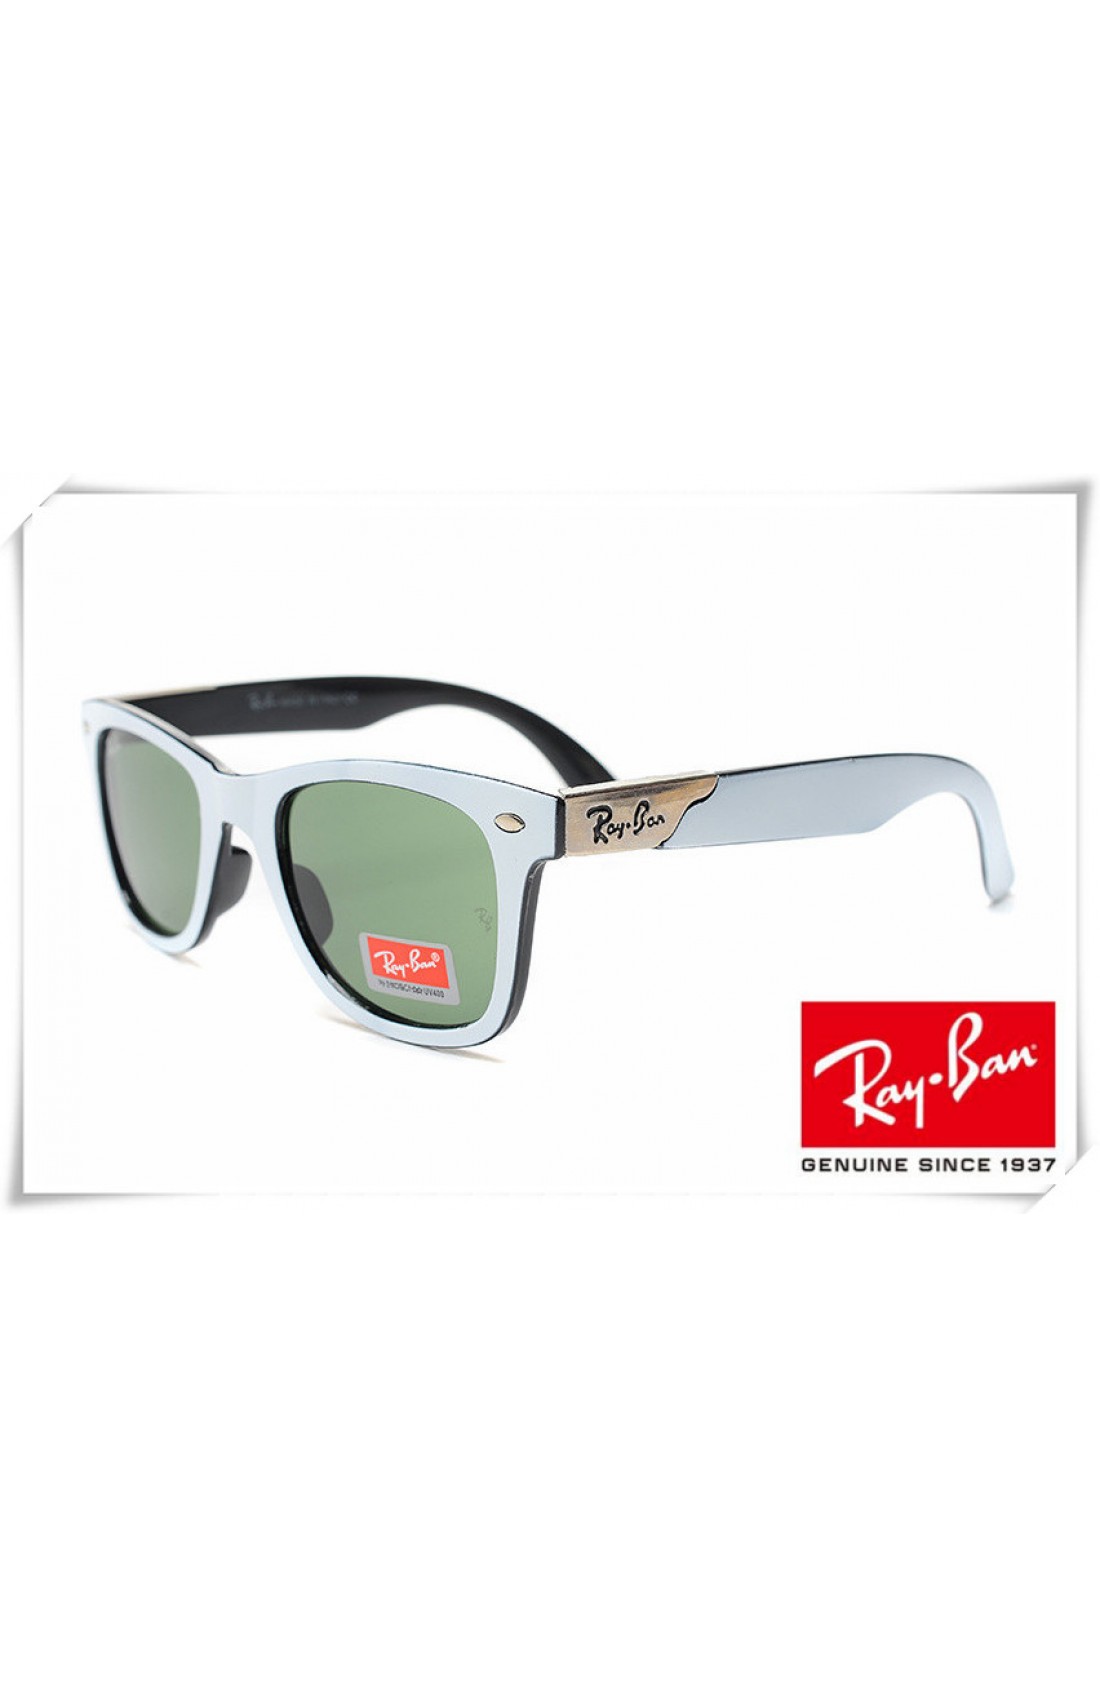 black and white ray ban glasses